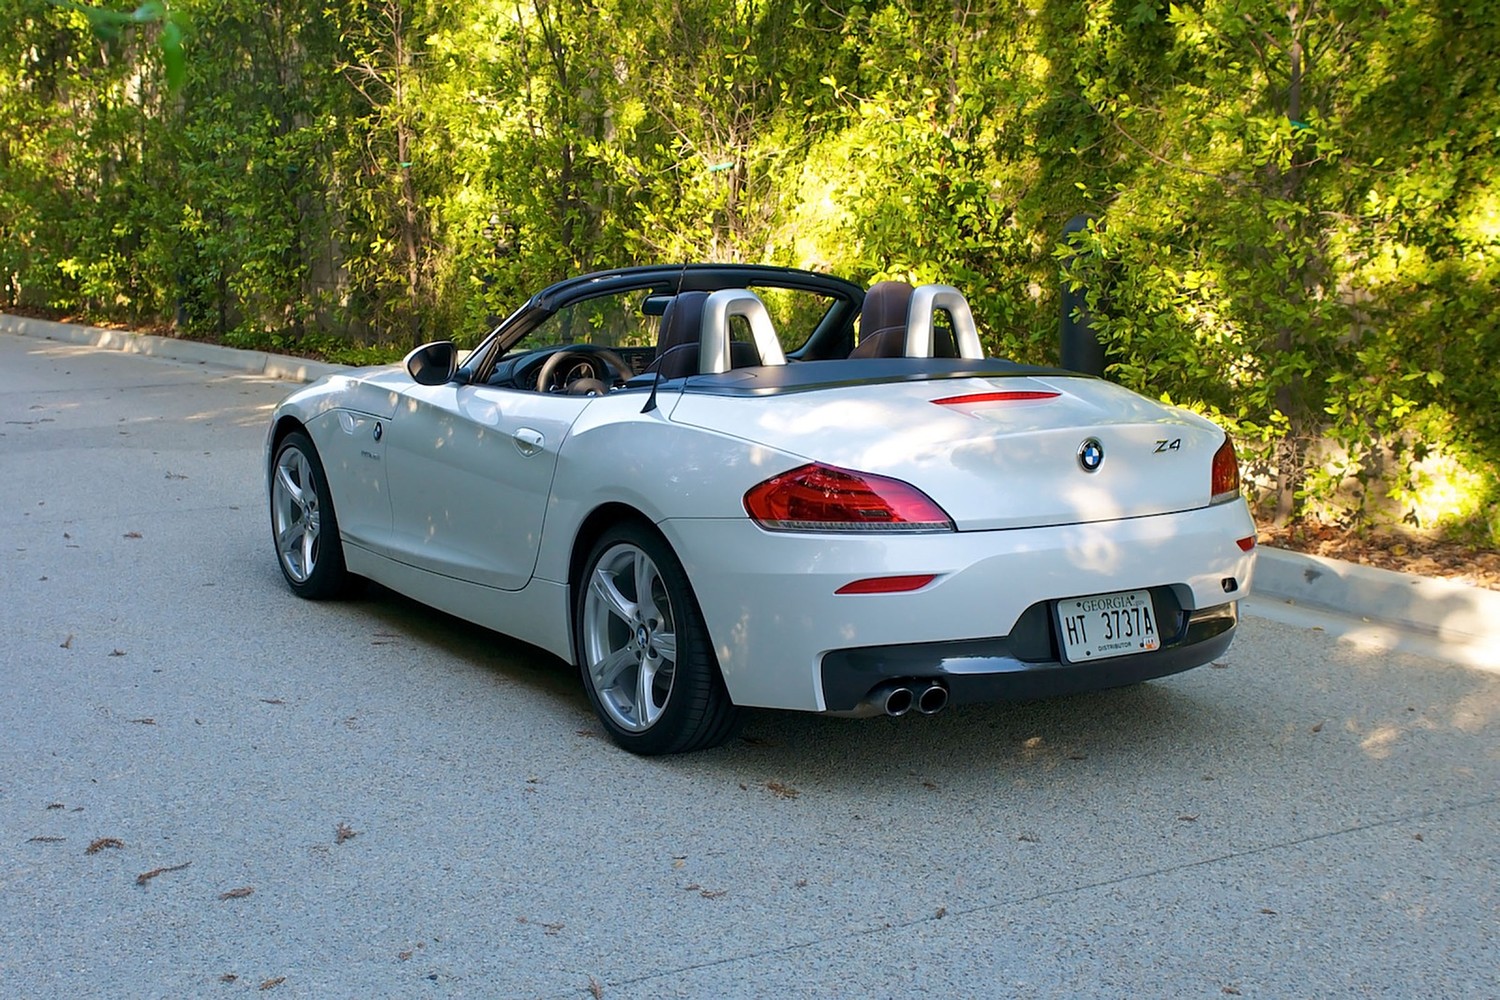 BMW Z4 sDrive28i Convertible Exterior (2012 model year shown)